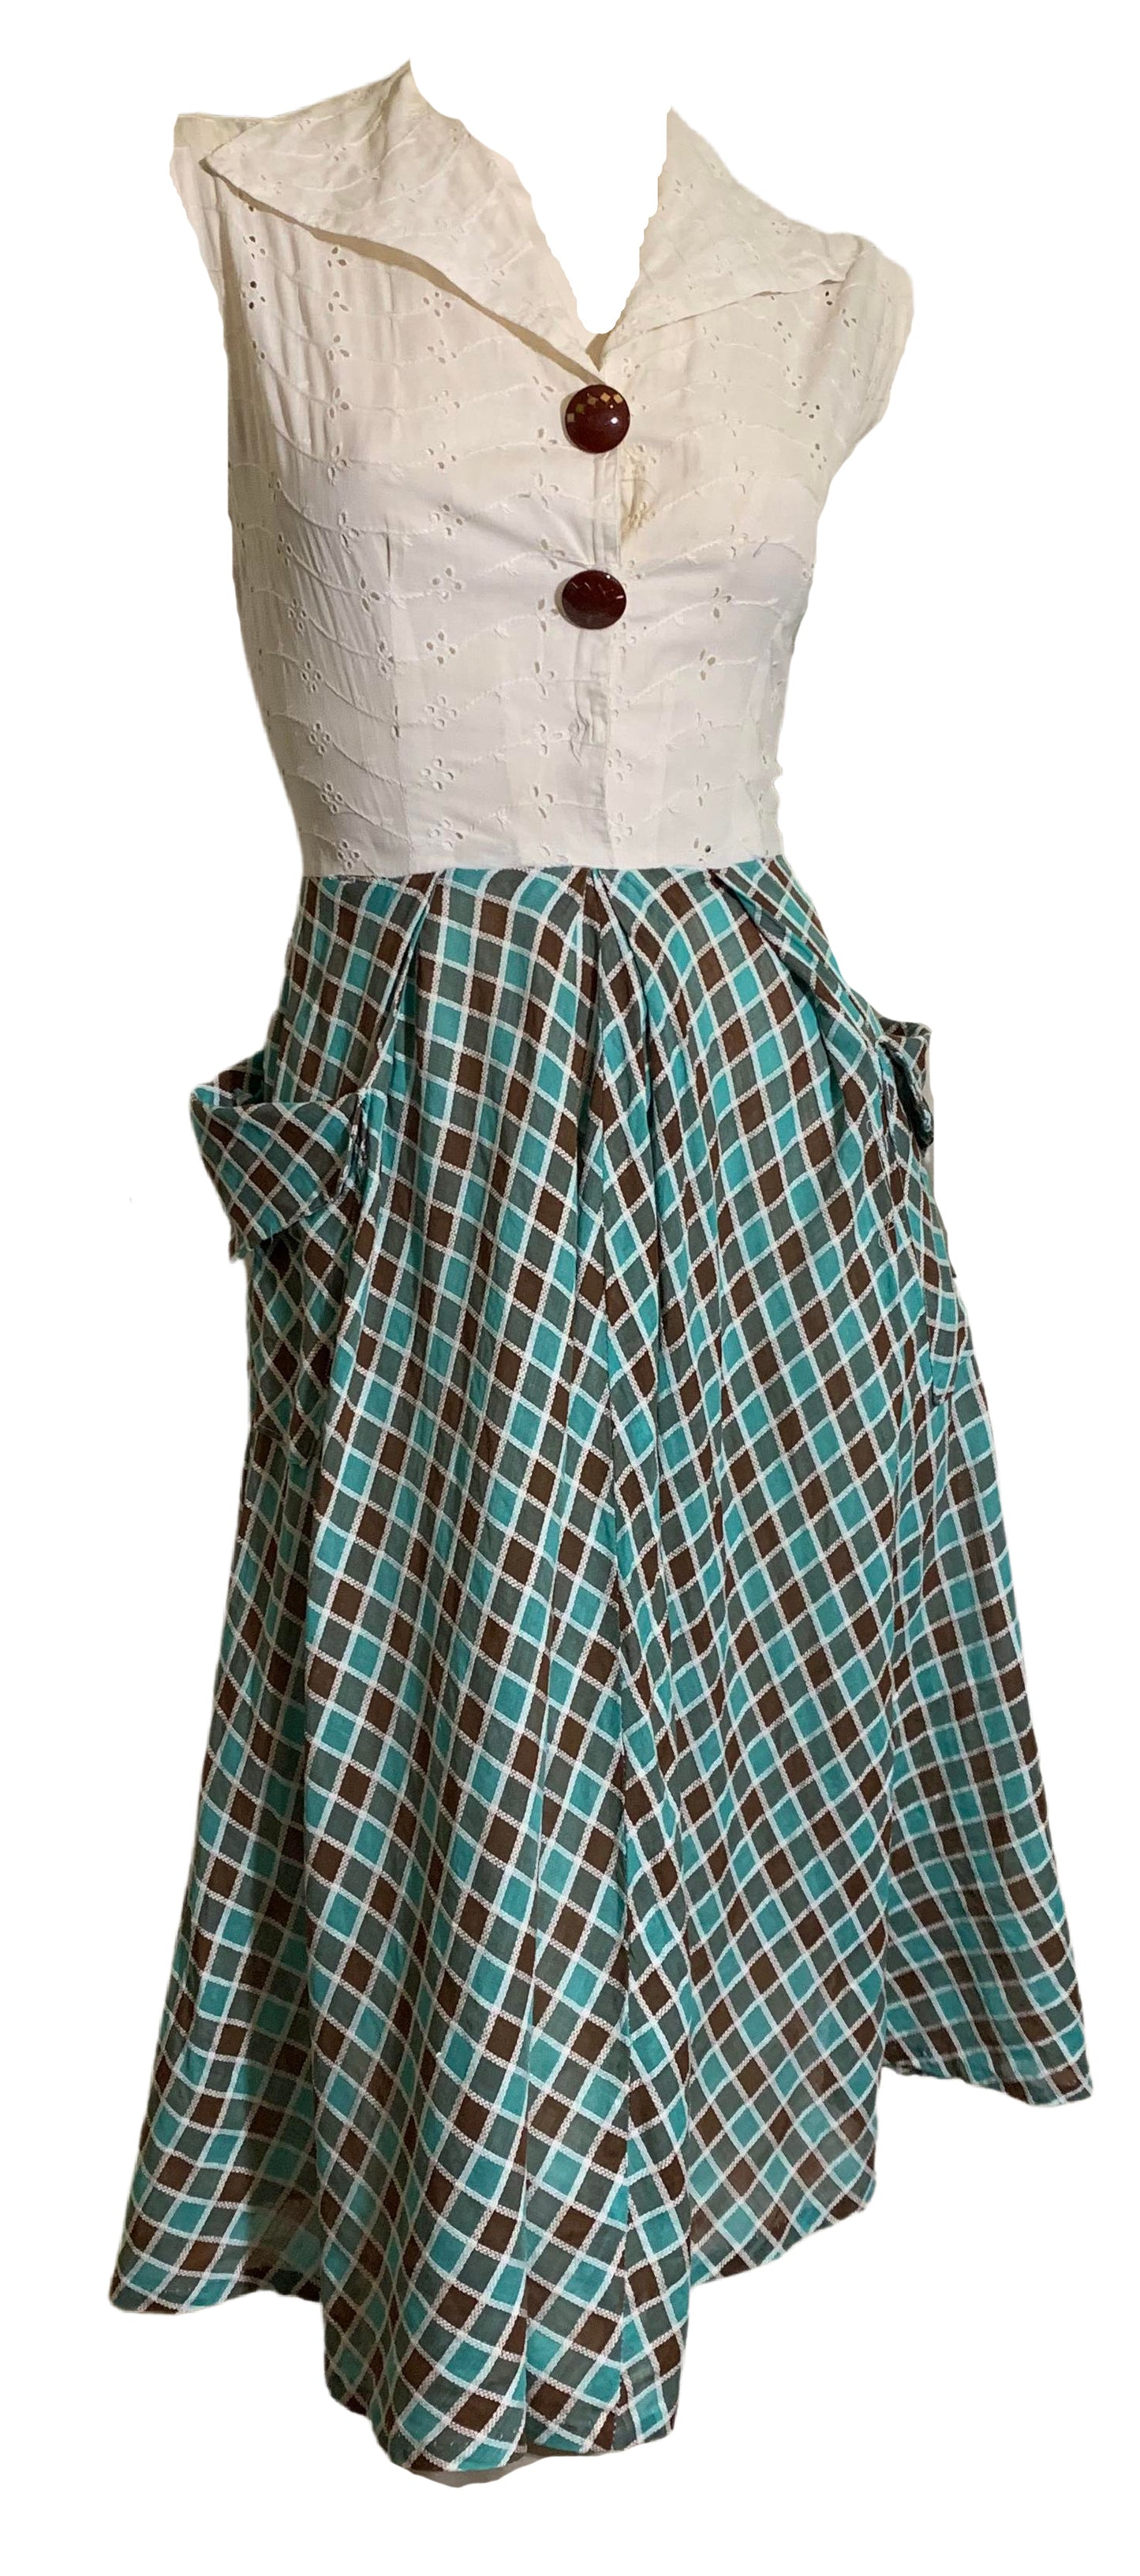 Teal and Brown Harlequin Skirted Day Dress circa 1940s